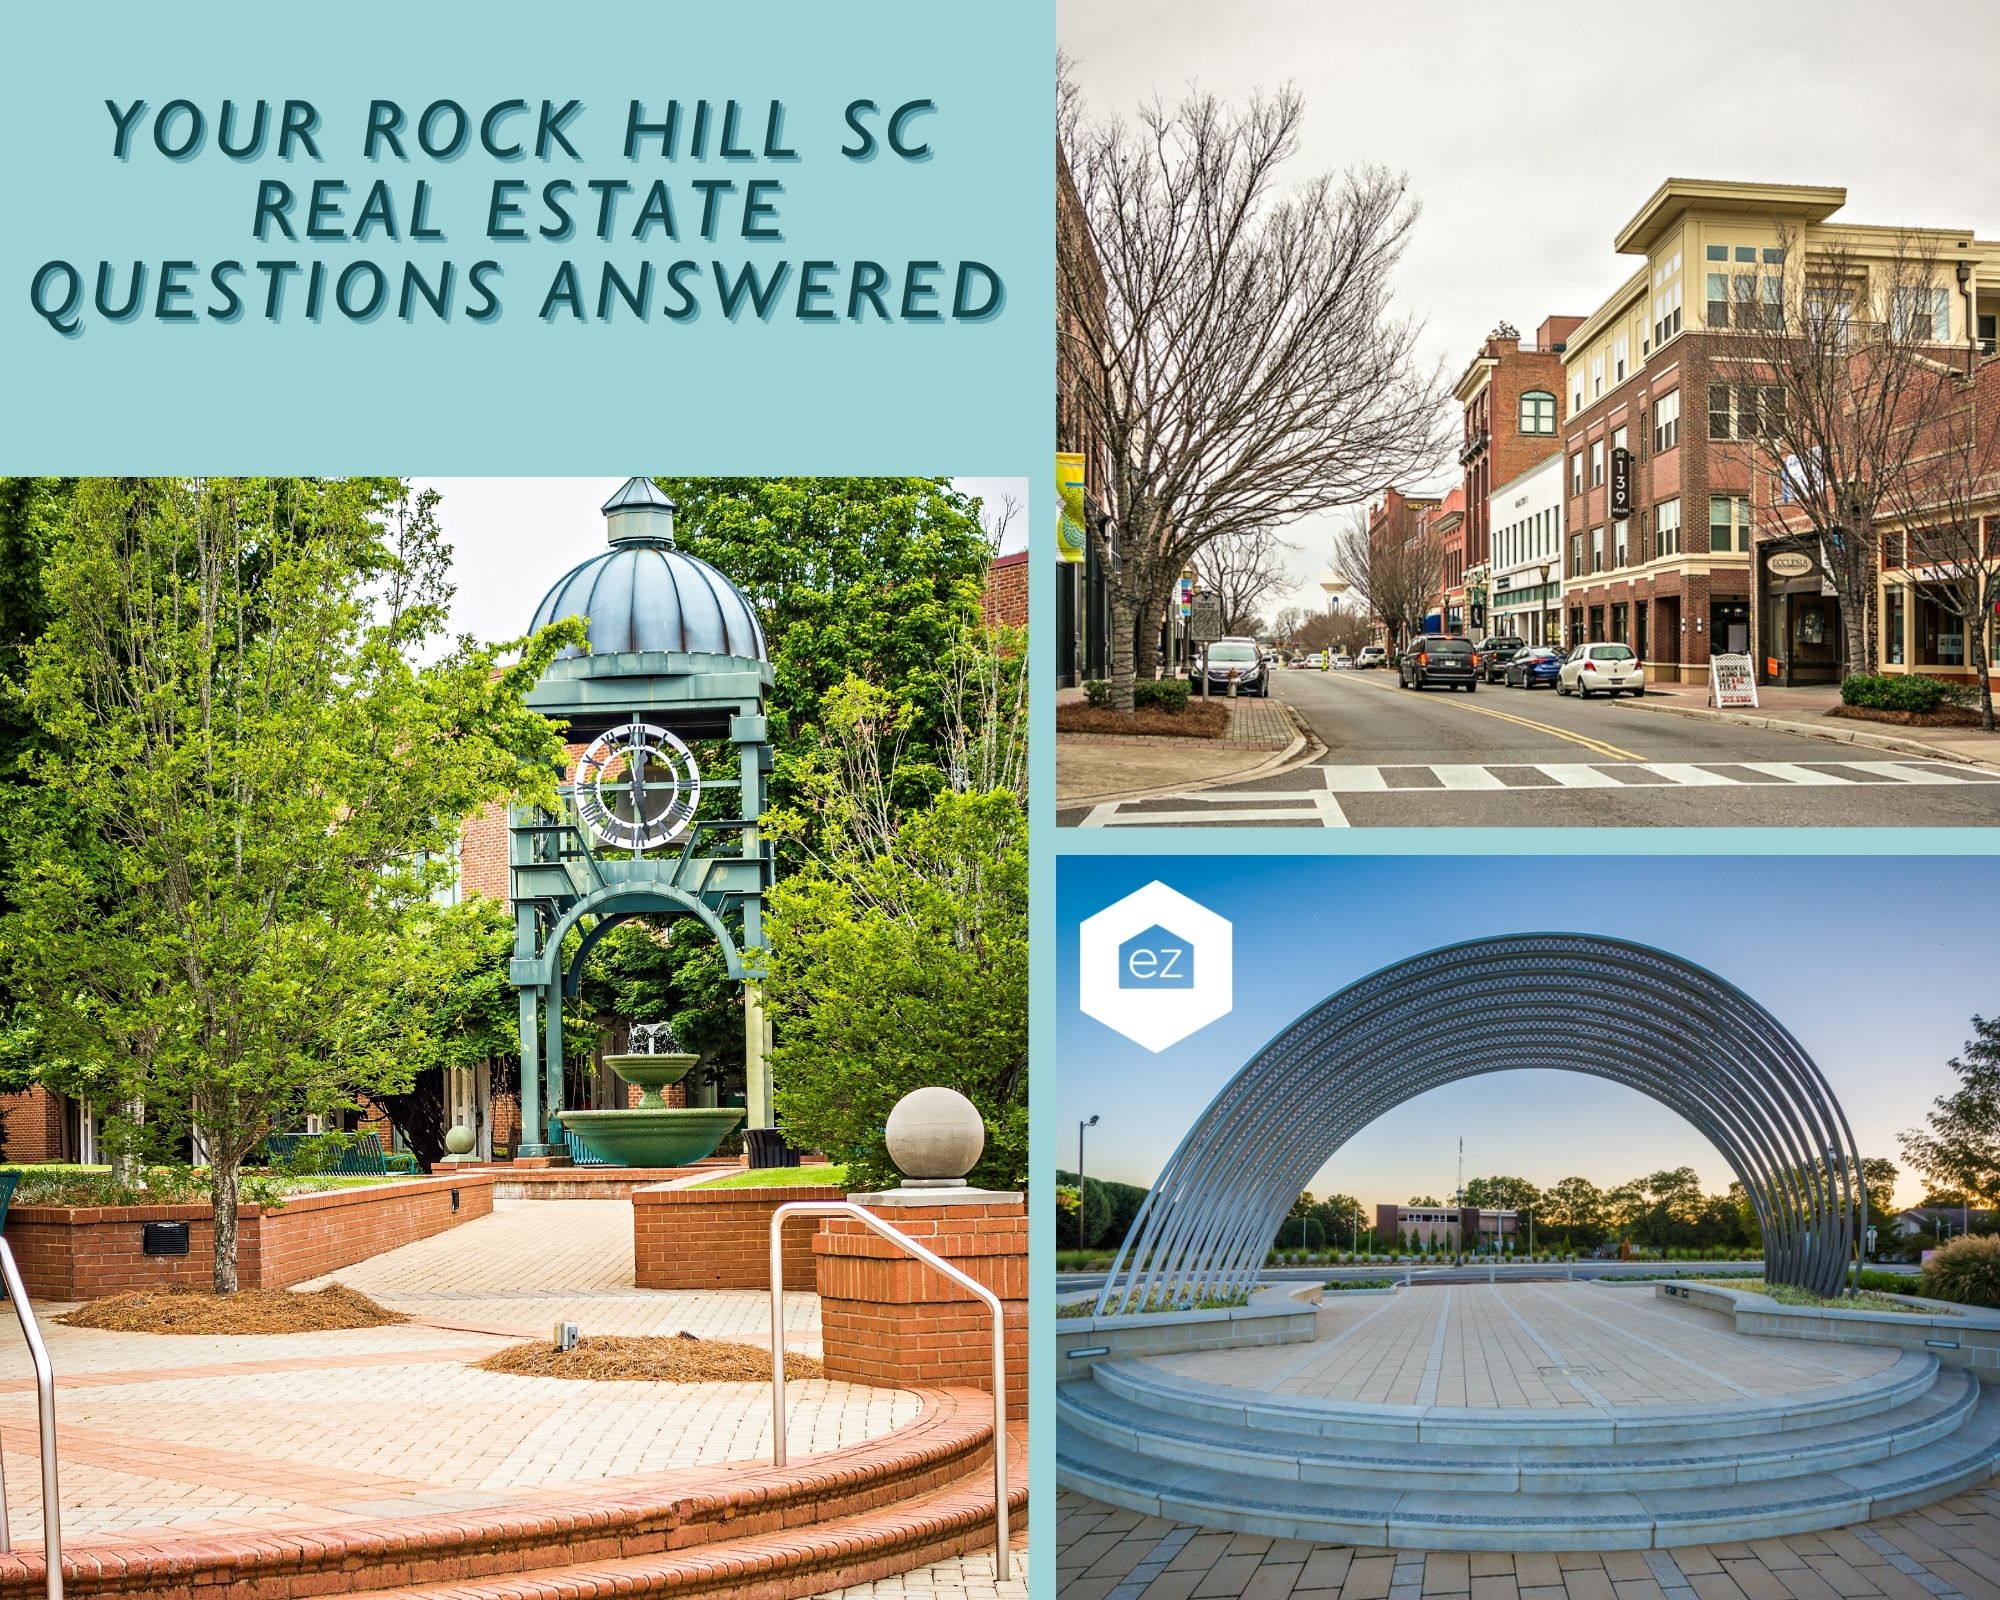 Your Rock Hill SC Real Estate Questions Answered